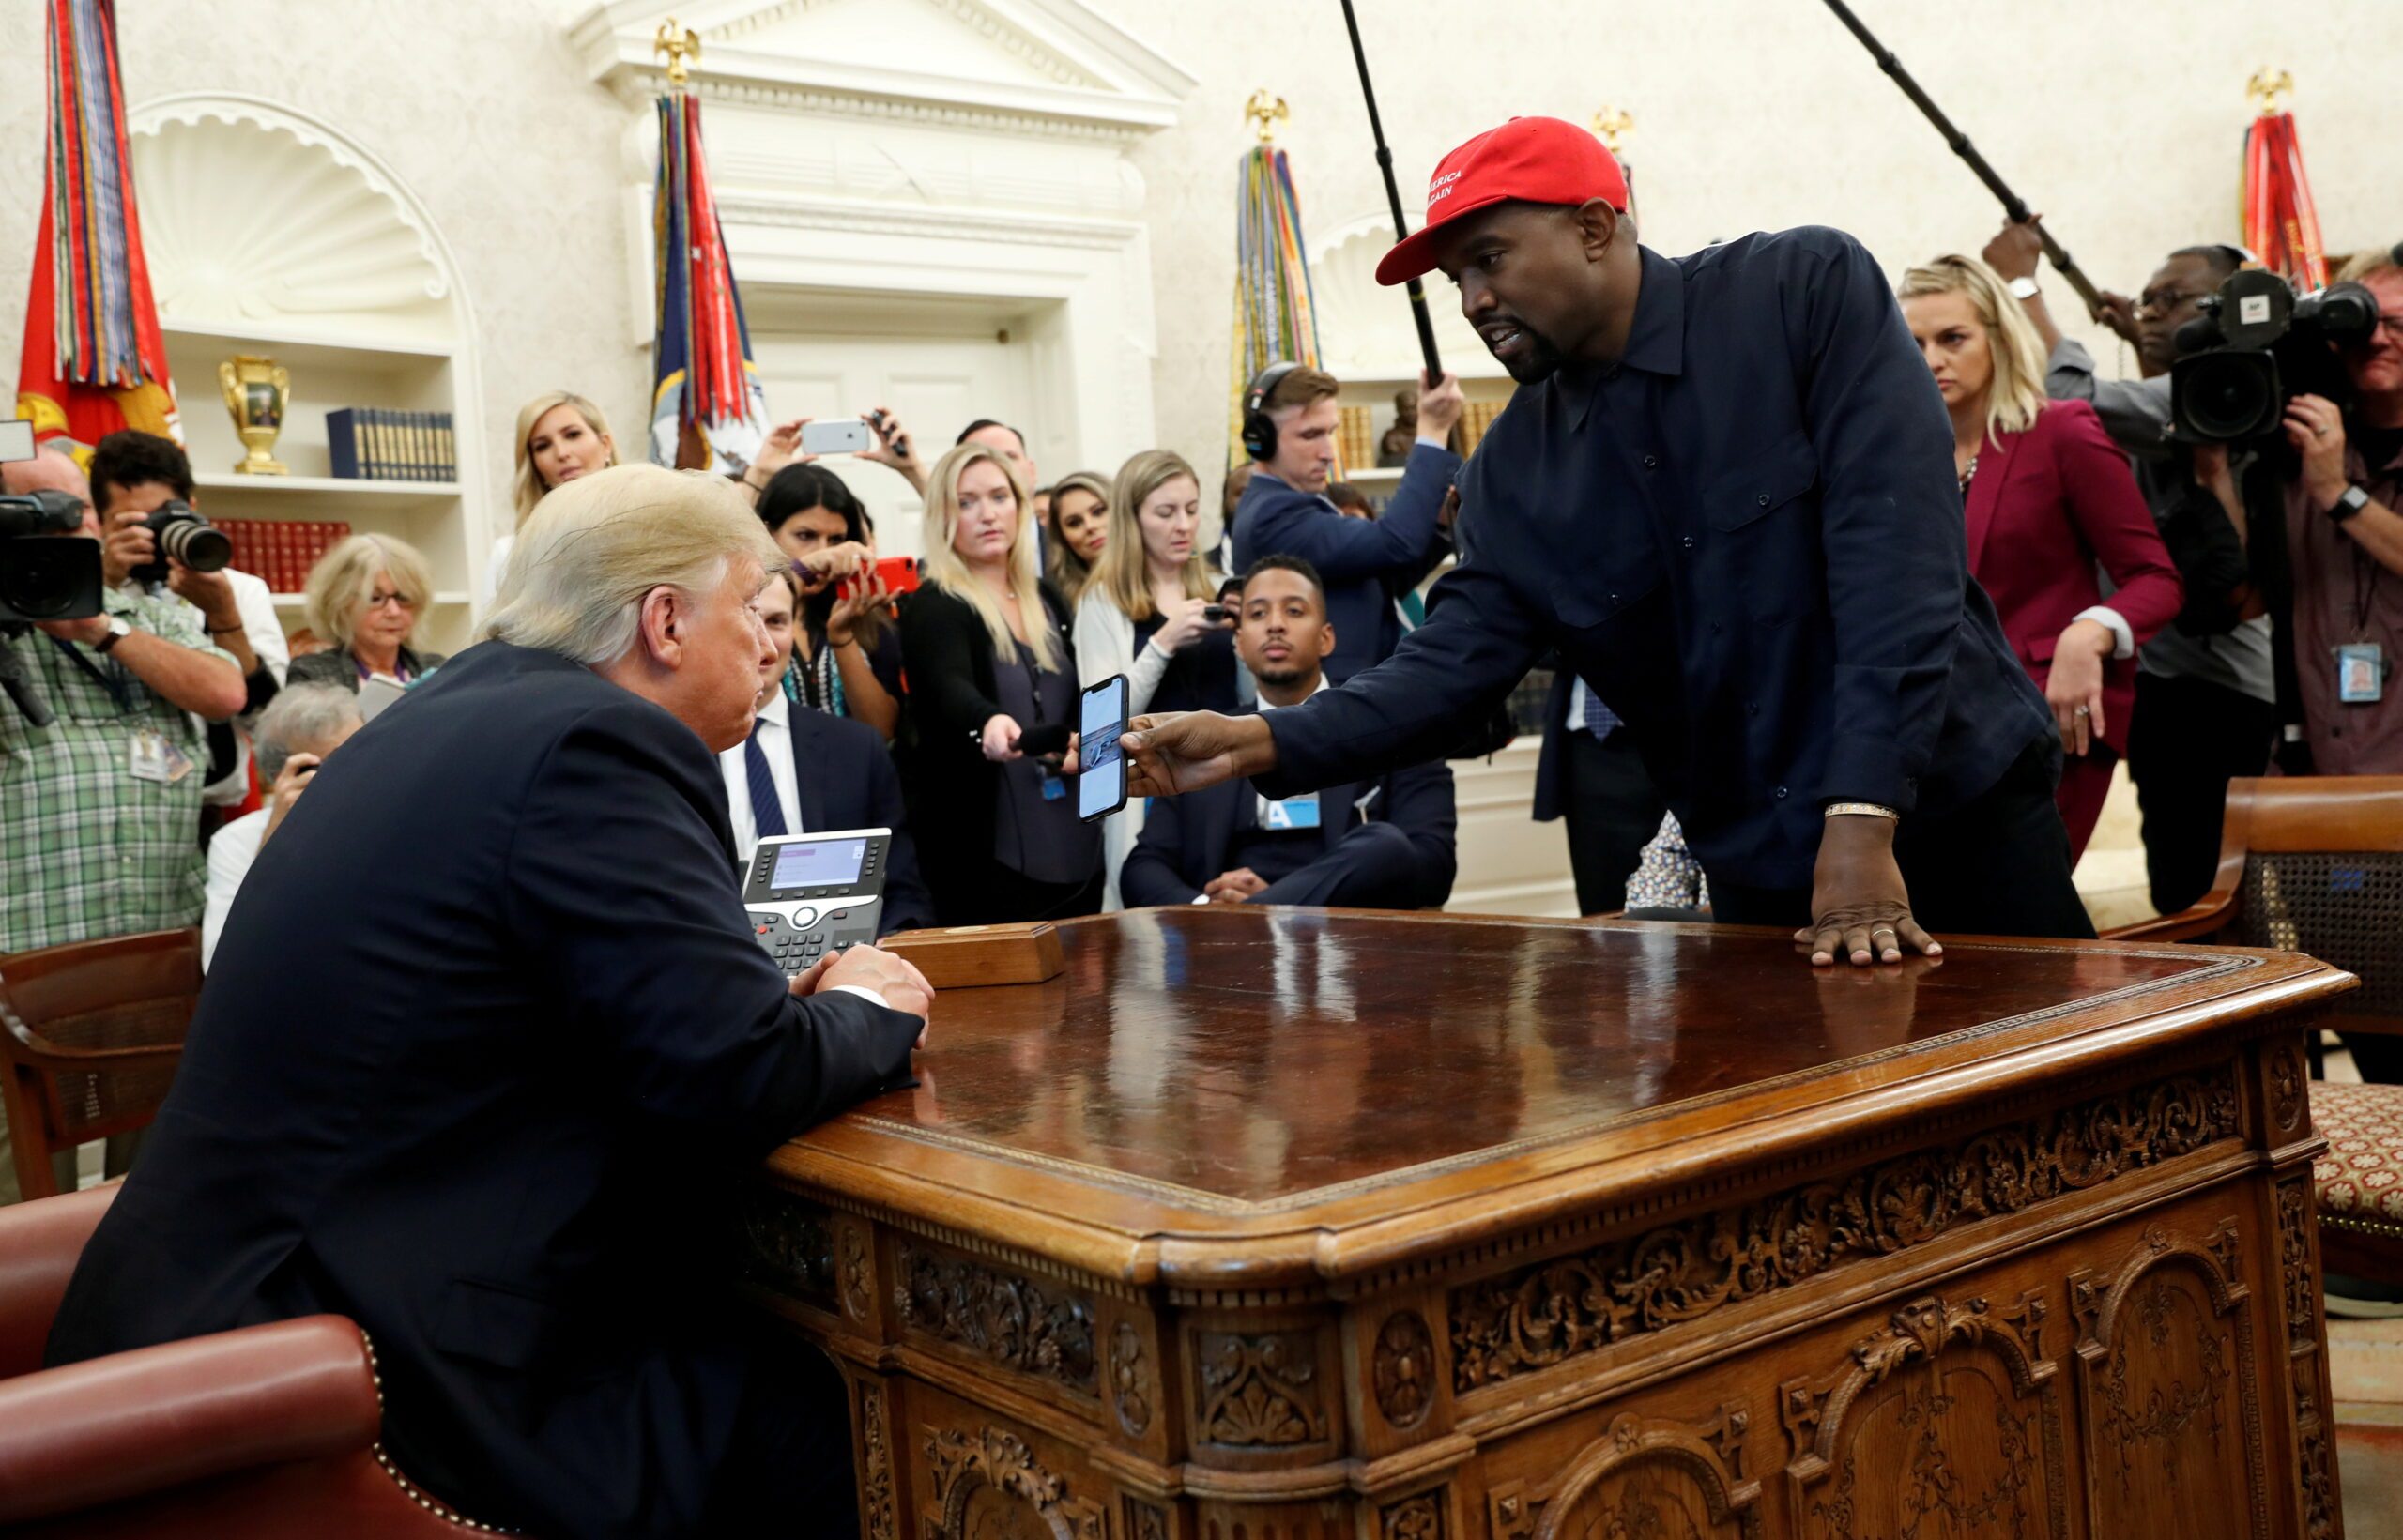 Kanye West publicist threatened Georgia election worker to confess to bogus fraud charges